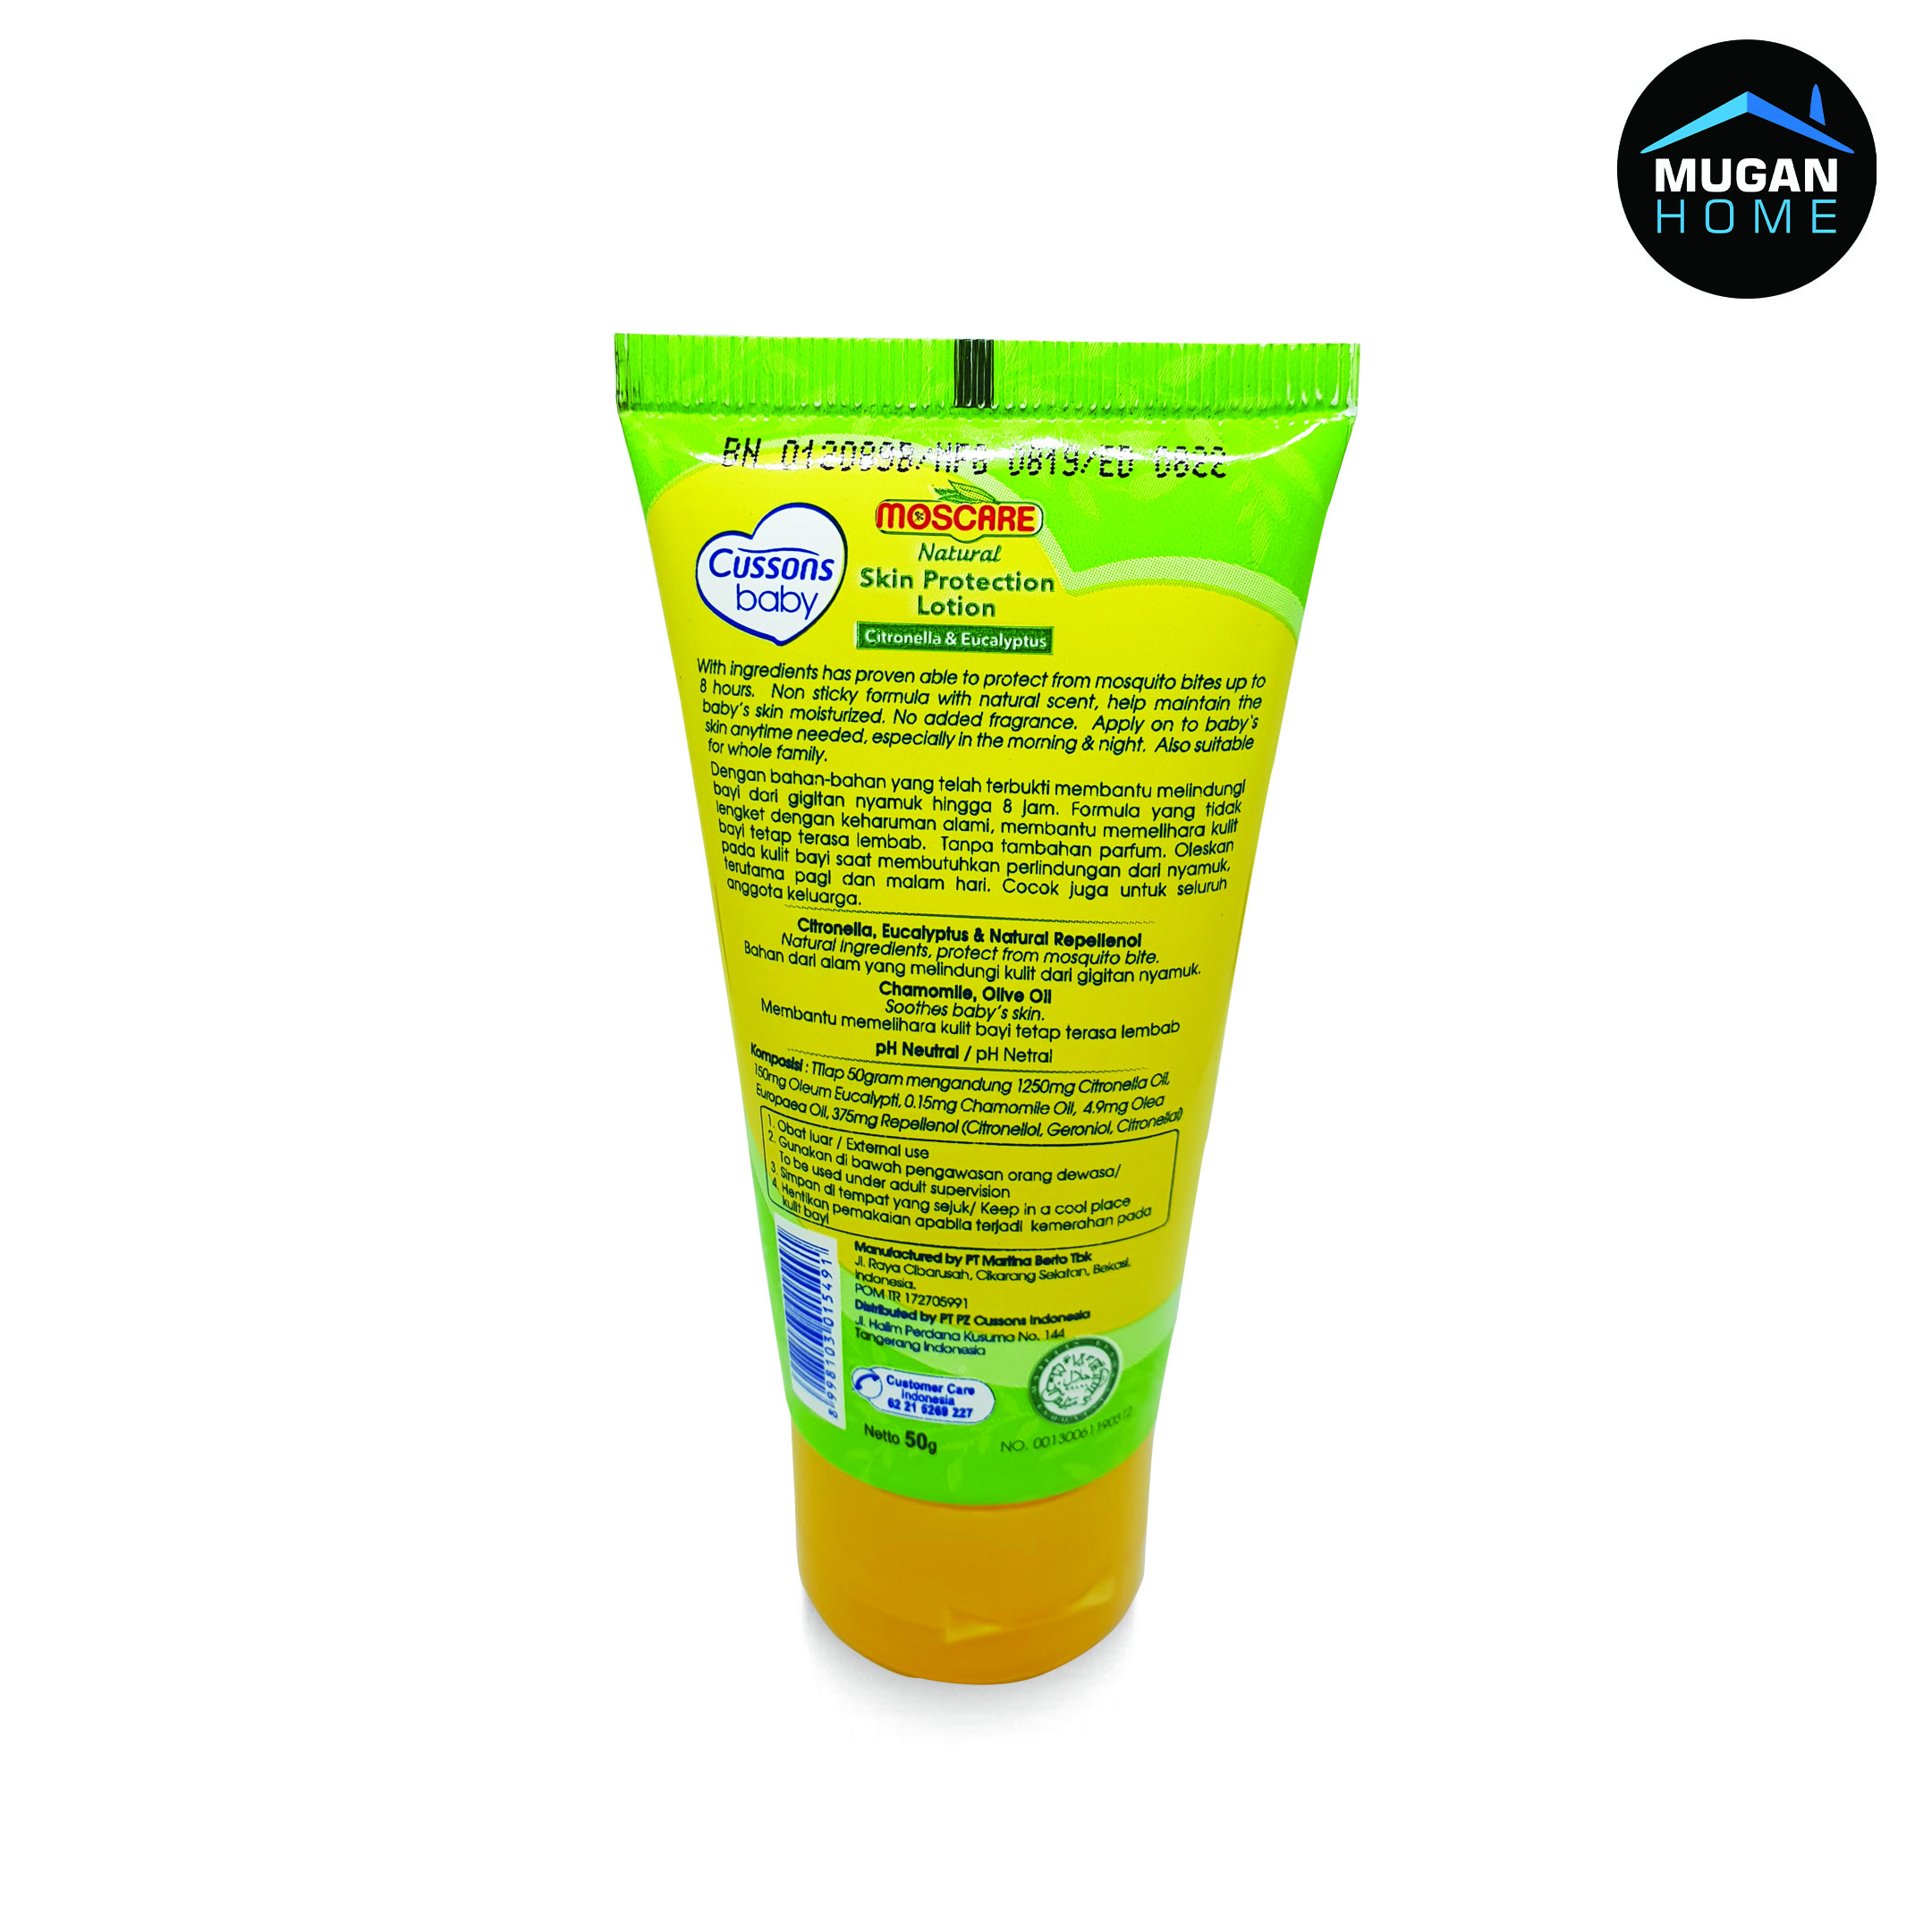 CUSSONS BABY MOSCARE NATURAL SKIN PROTECTION LOTION 50GR  